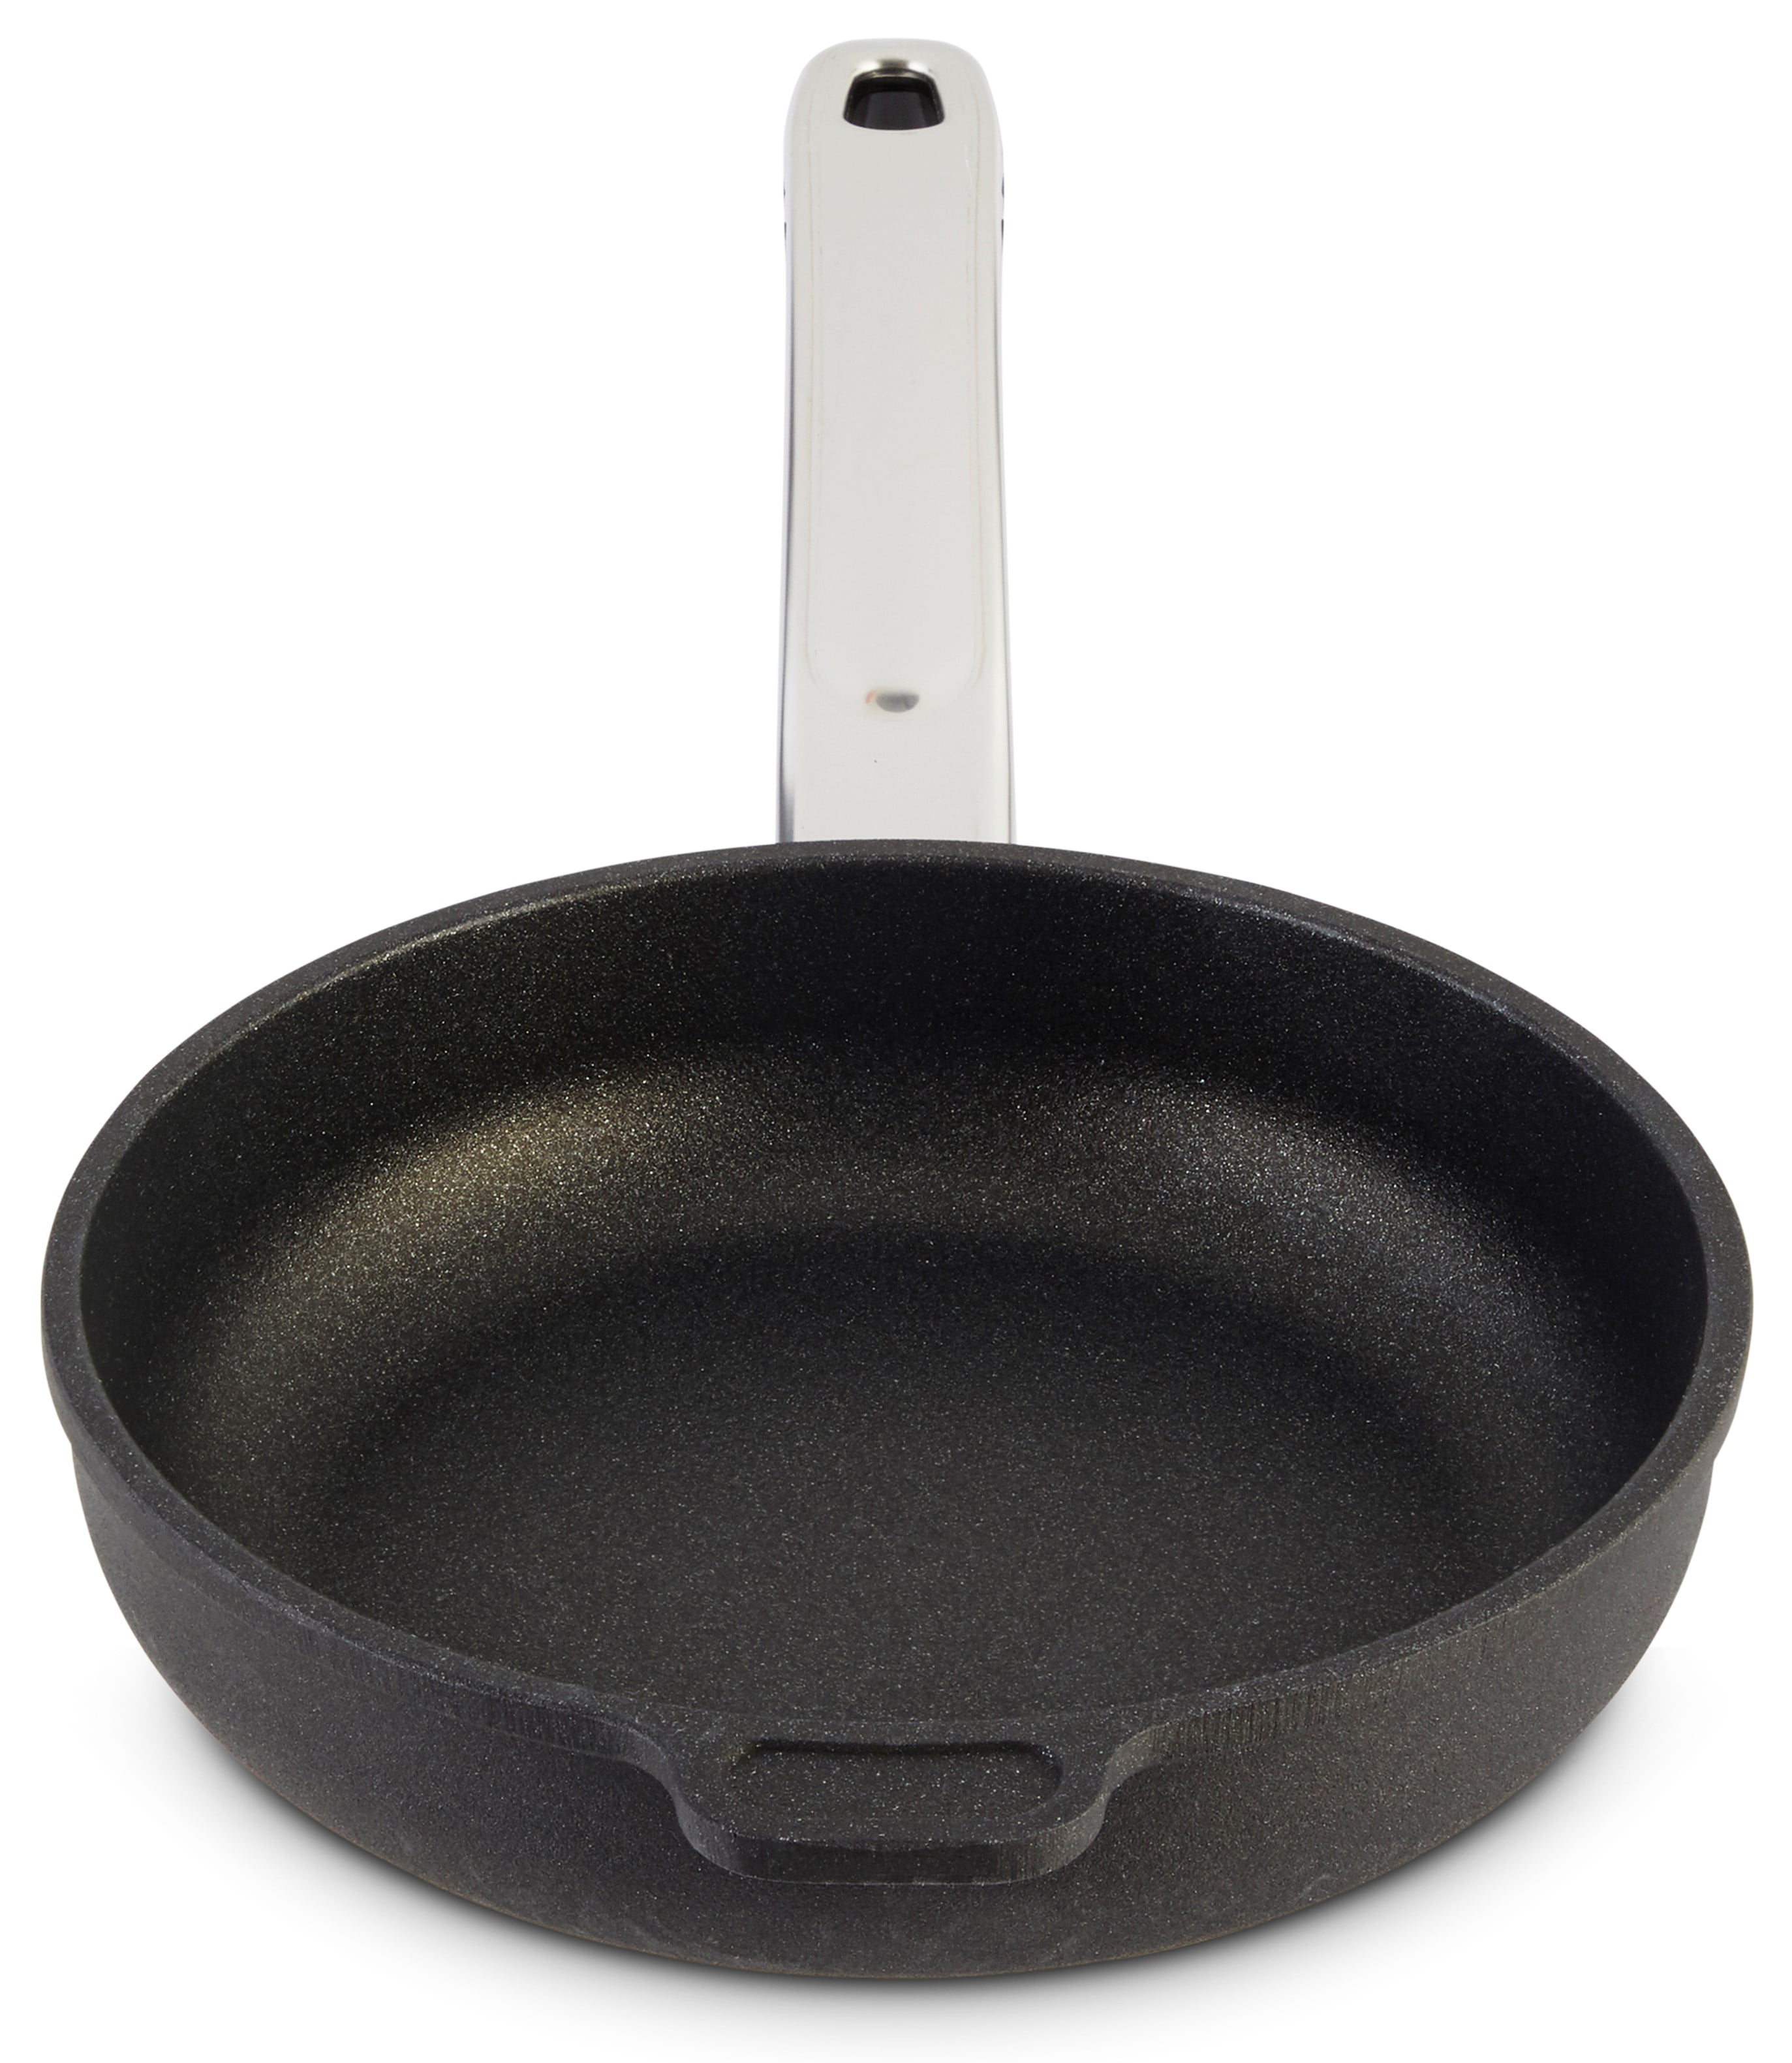 8 Stone Earth Fry Pan by Ozeri, with a 100% APEO & PFOA-Free Nonstick  Coating from Germany, 1 - Kroger